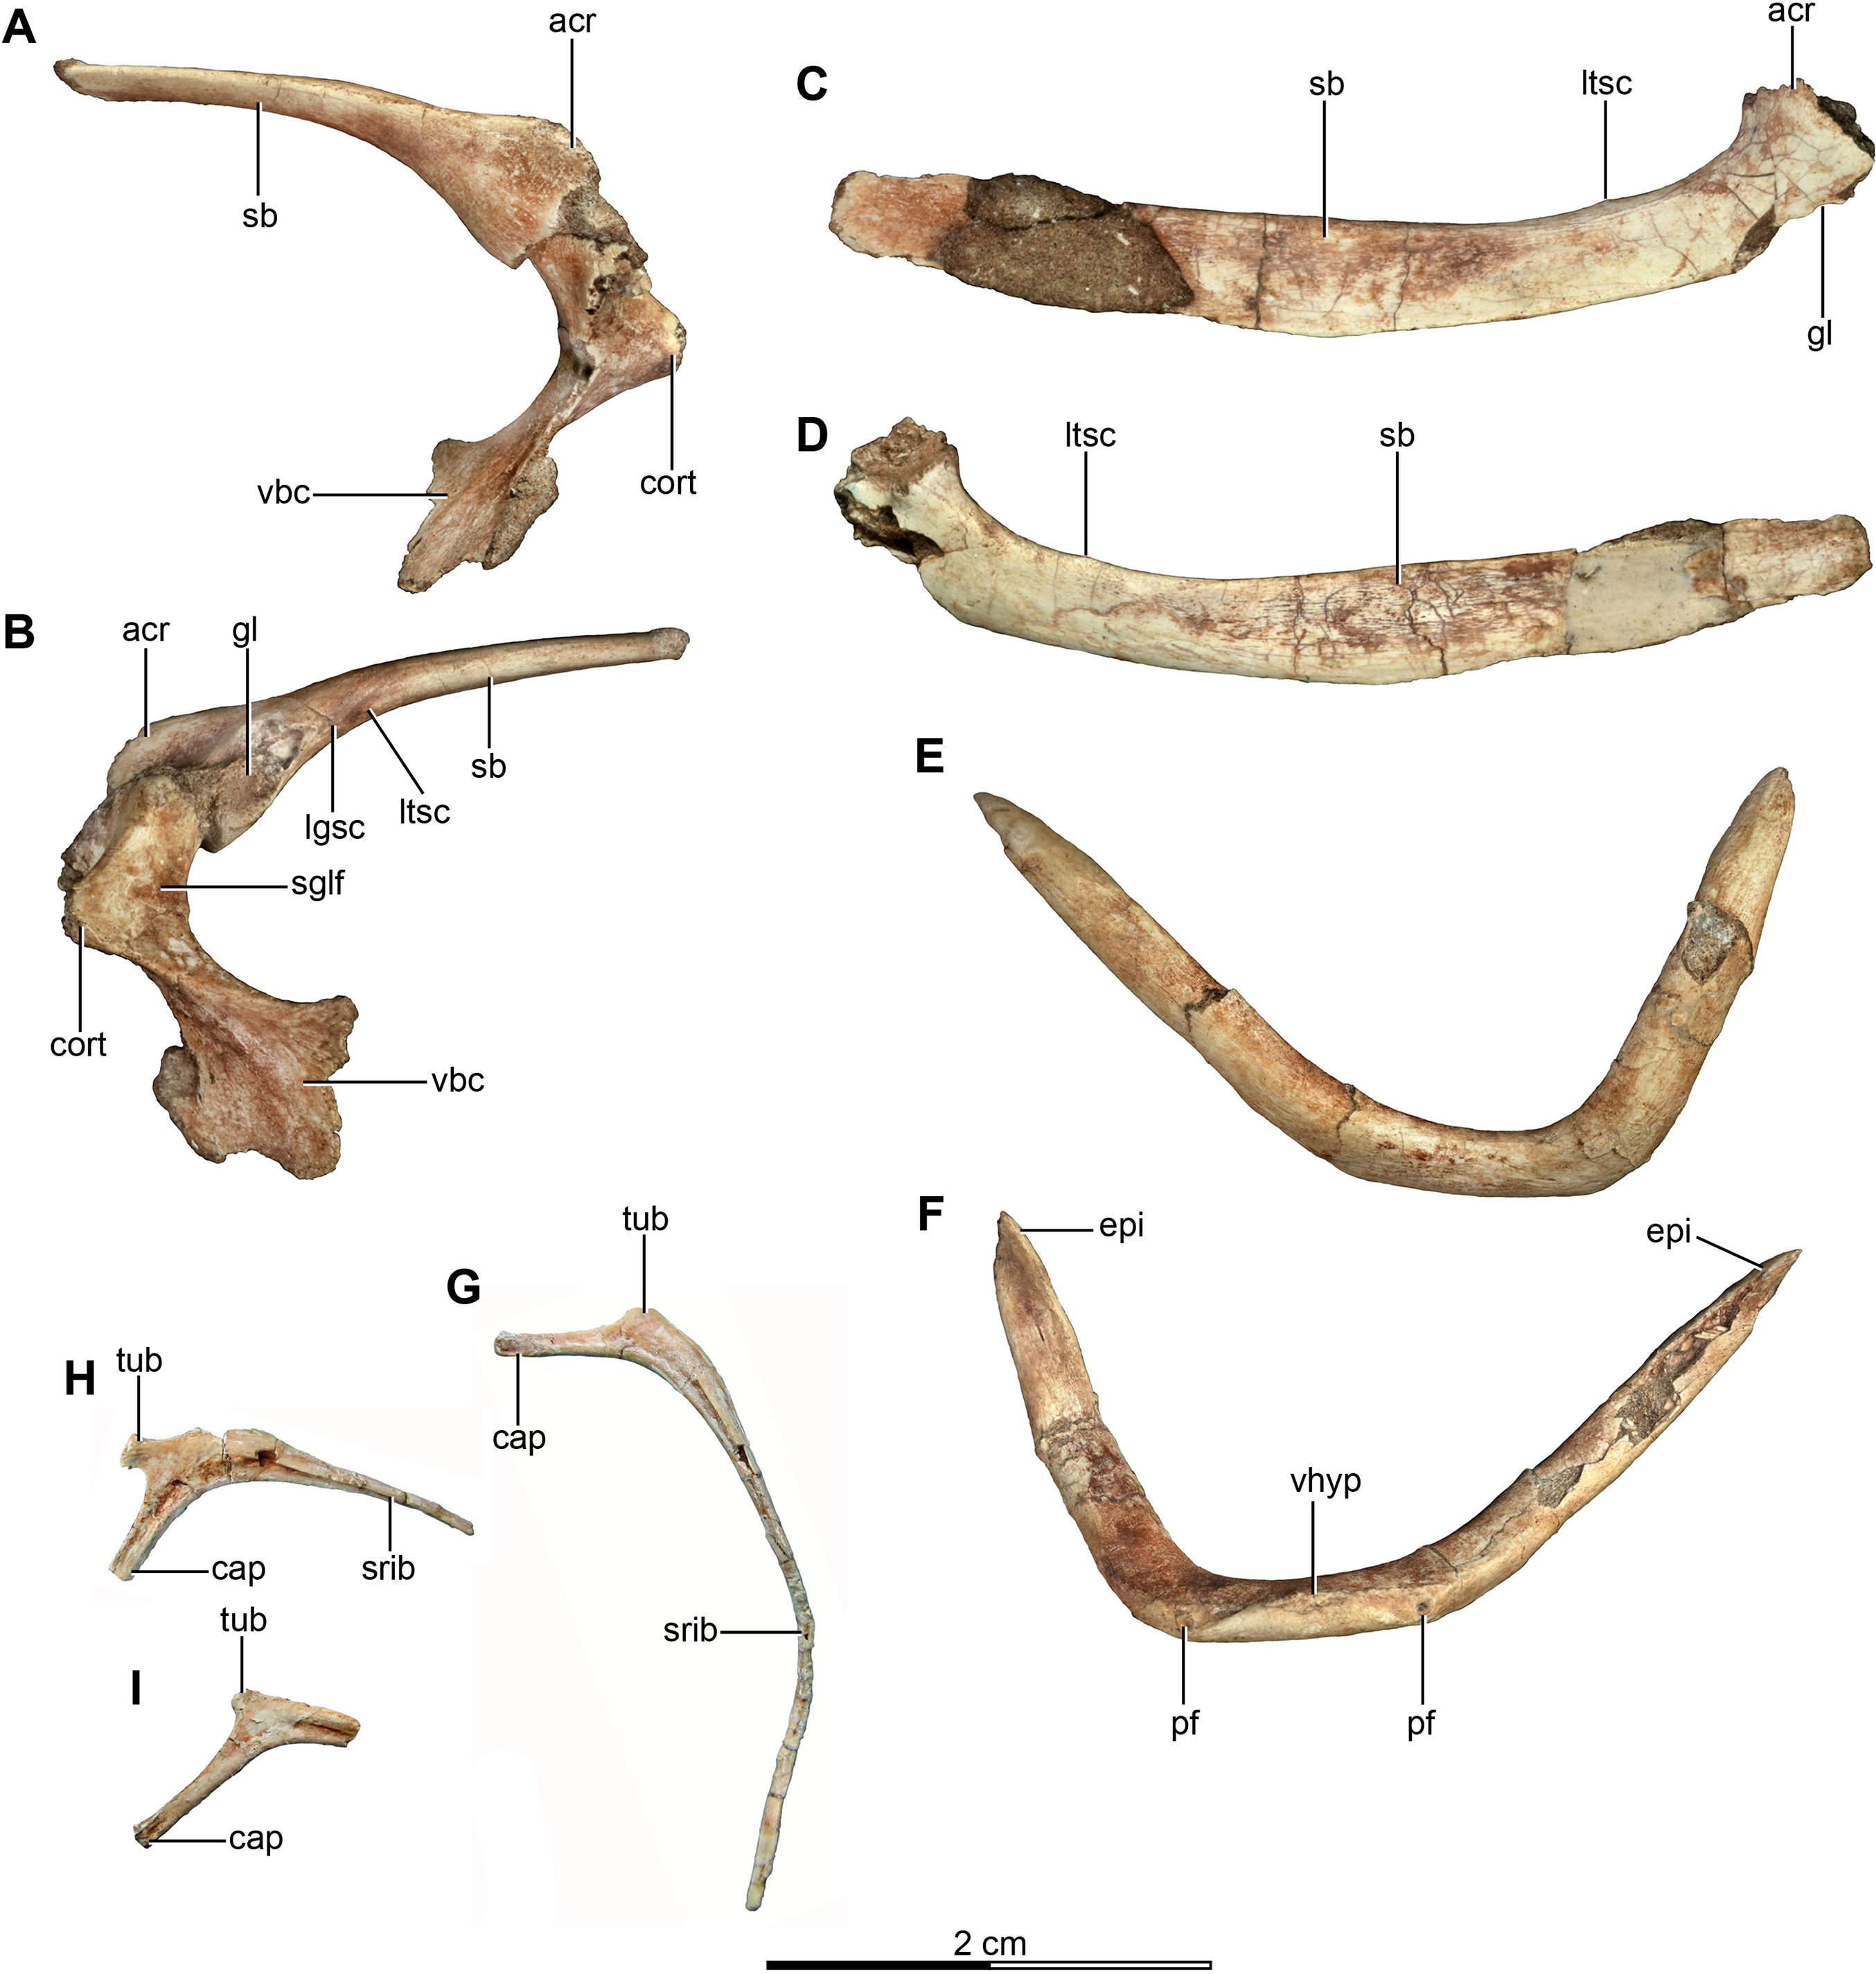 Postcranial skeletal anatomy of the holotype and referred specimens of